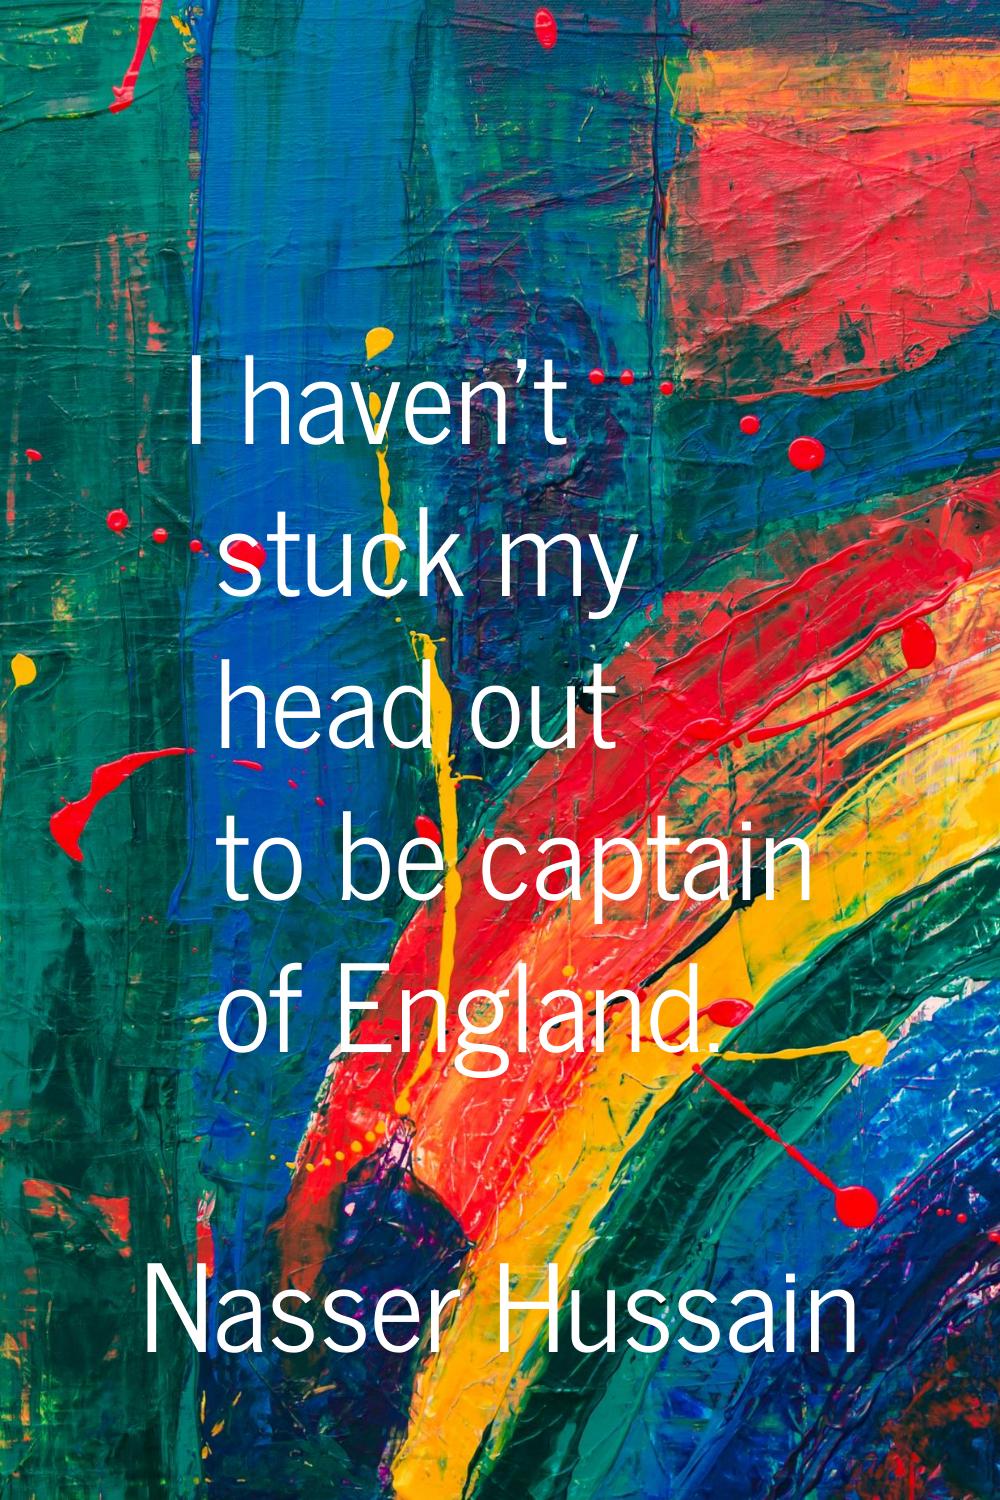 I haven't stuck my head out to be captain of England.